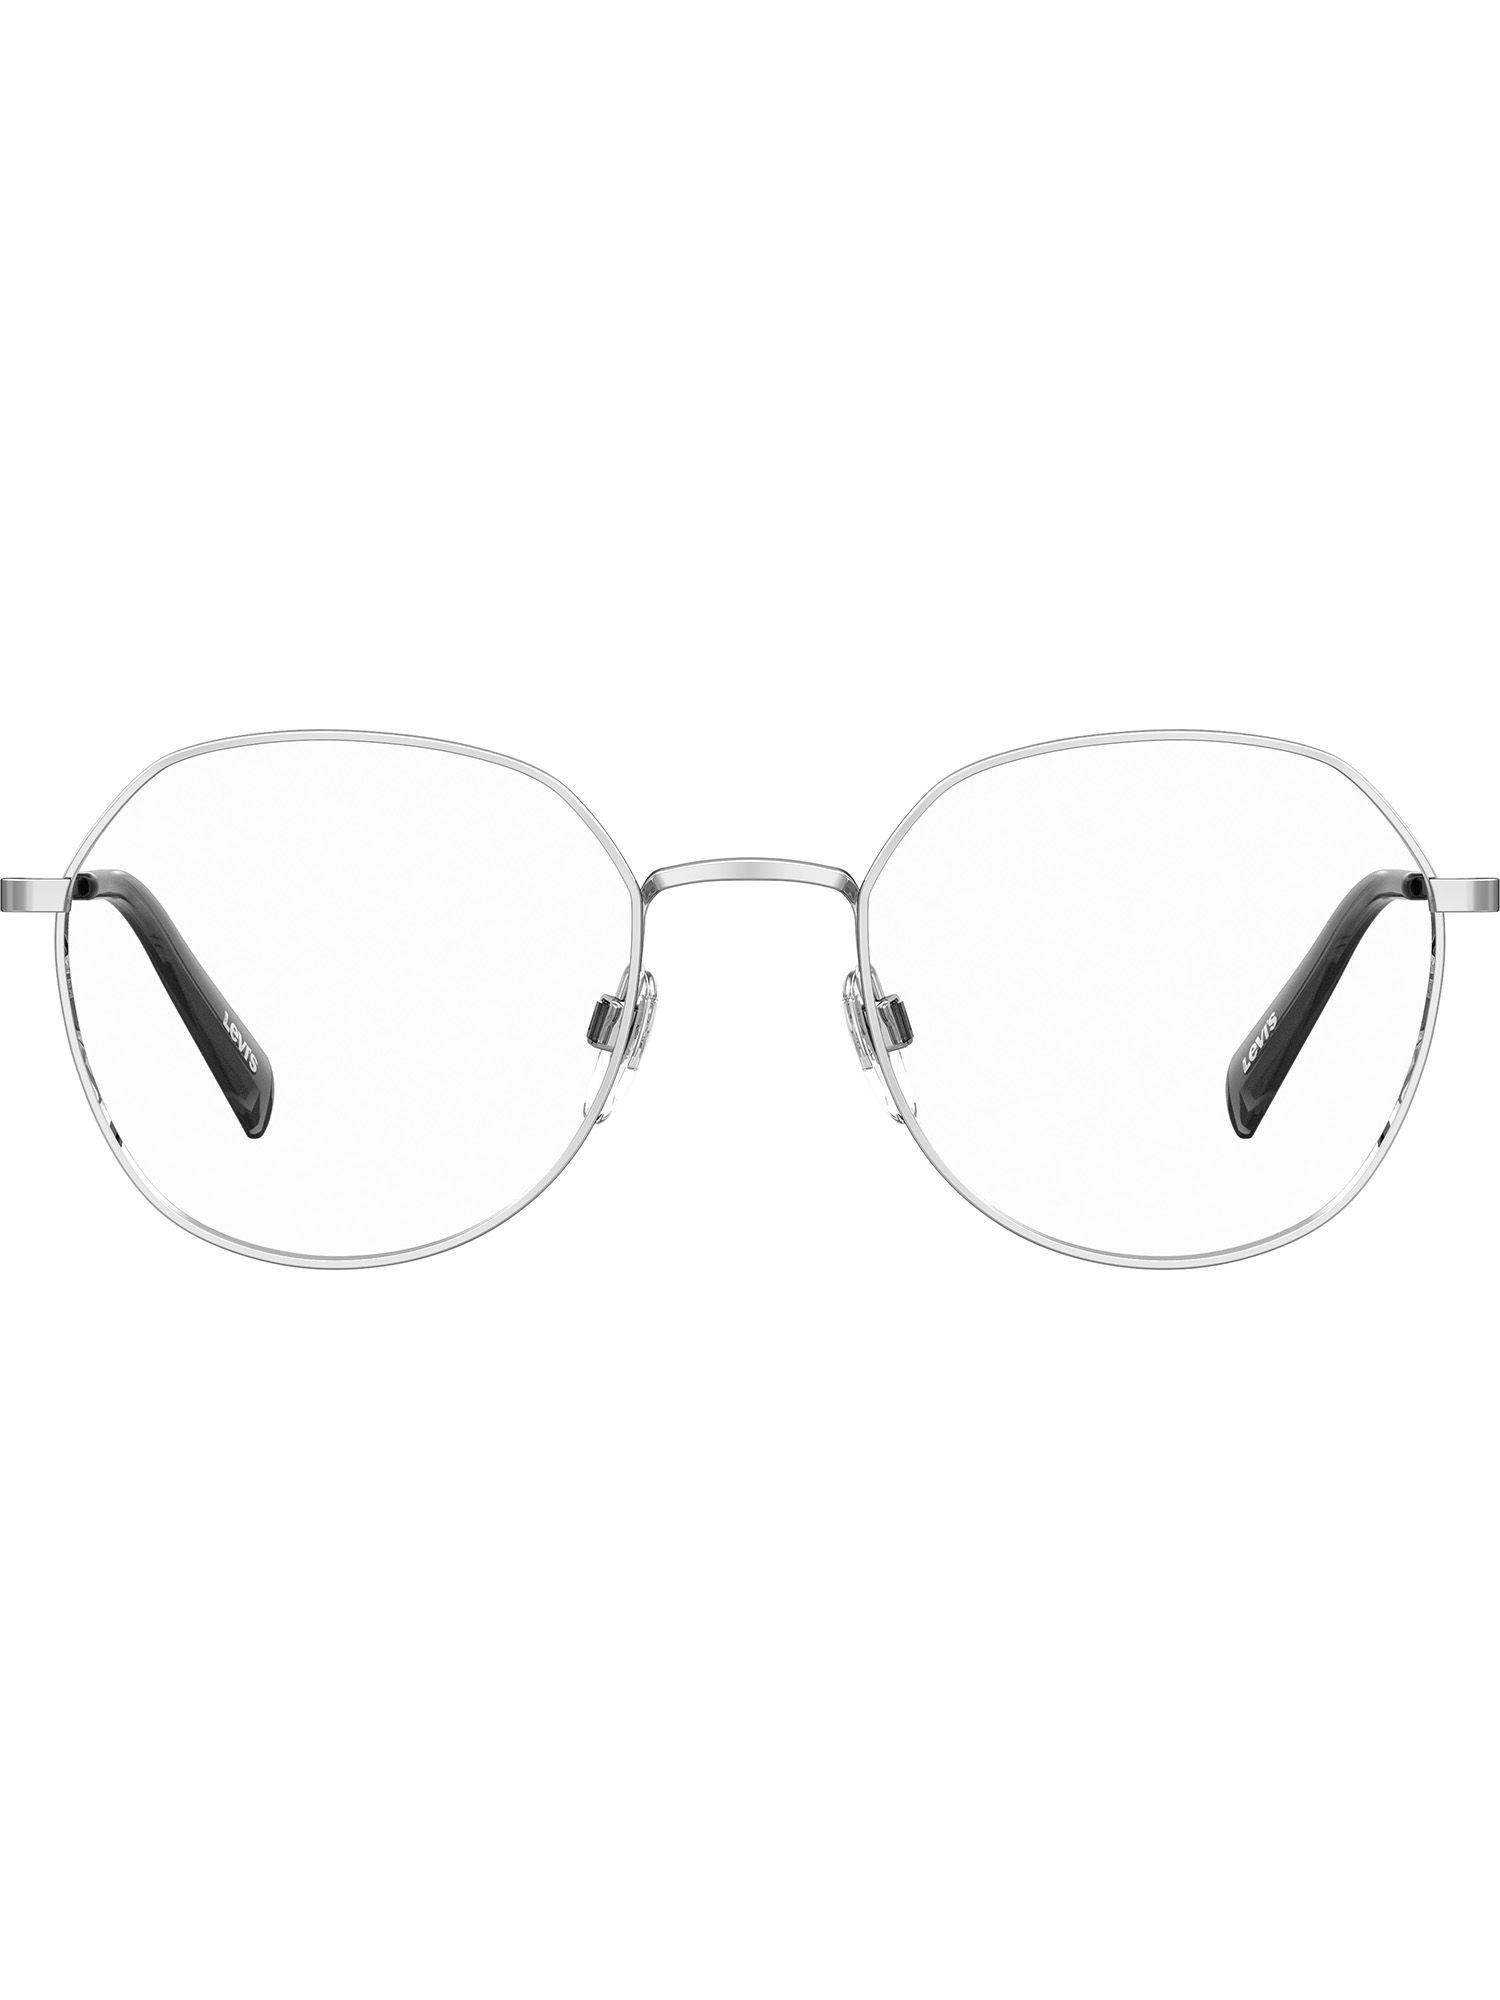 round-oval frame for men and women metal material in palladium colour (lv 1014 010 5220)